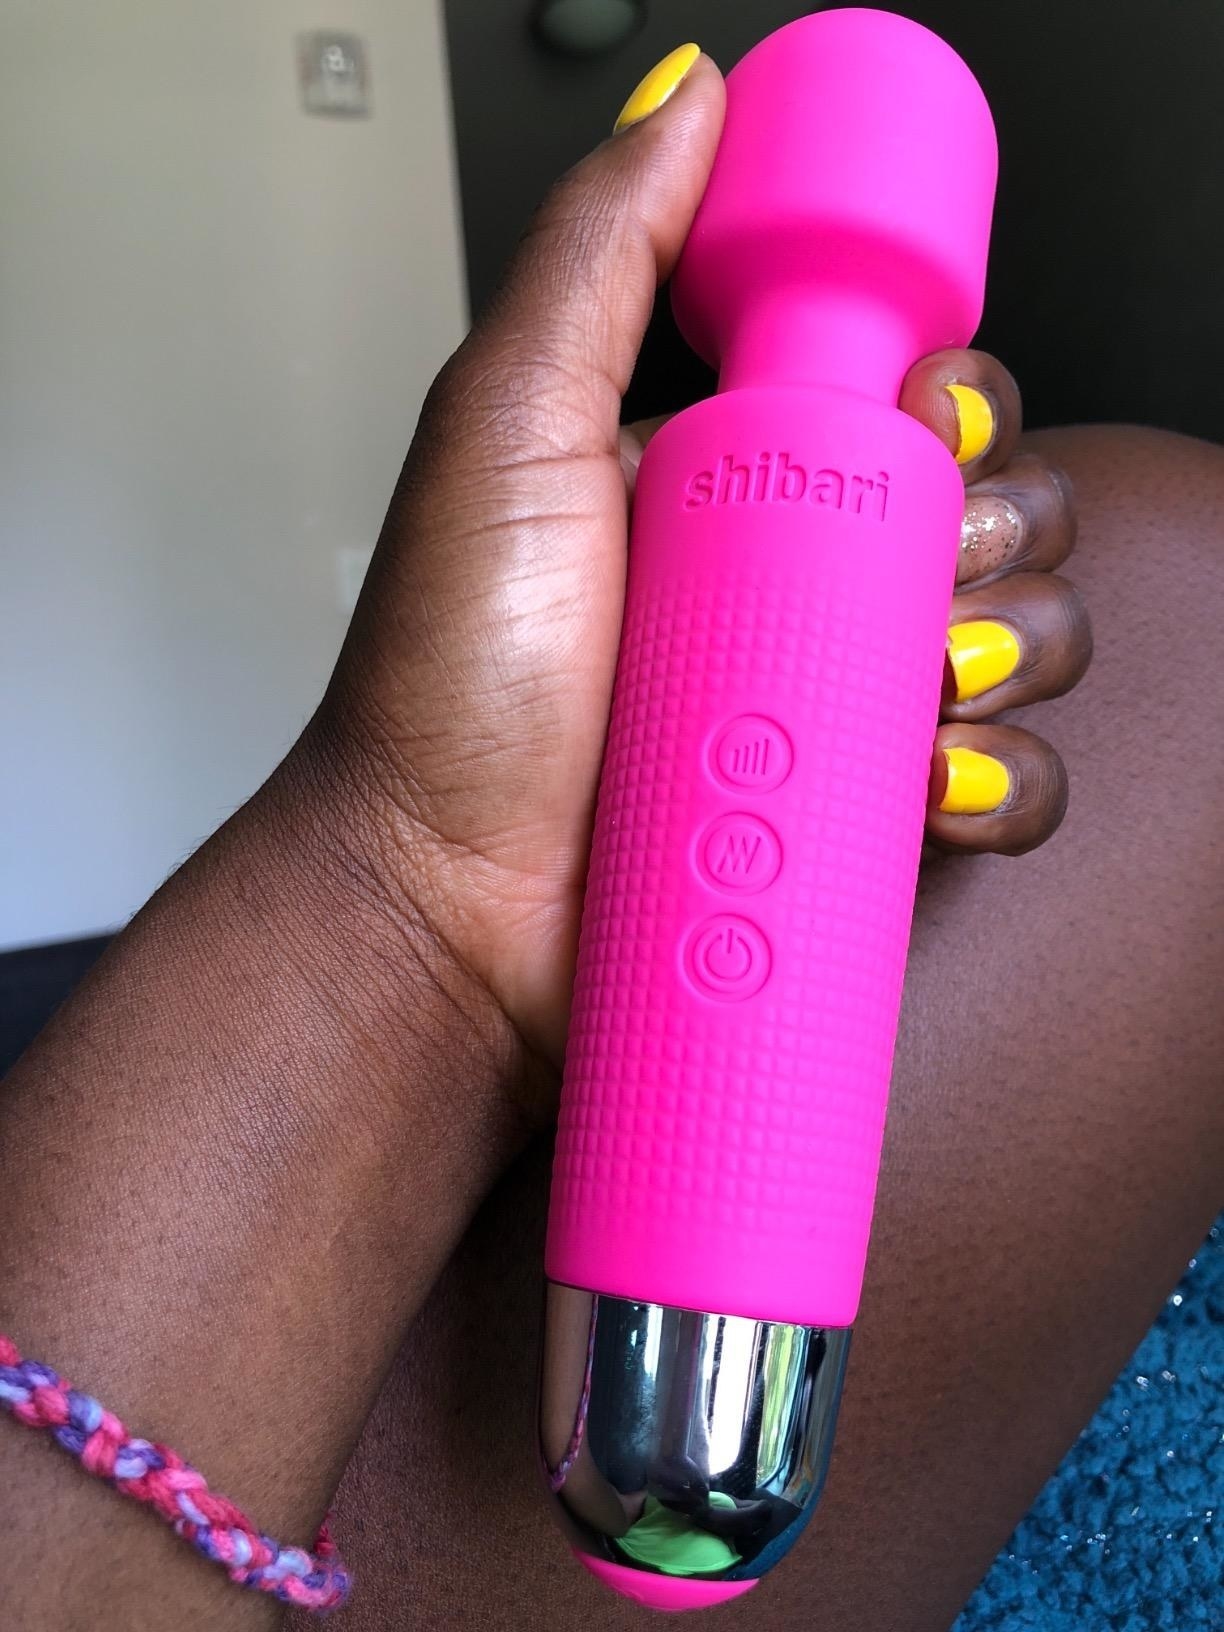 A reviewer holding the forearm-sized dildo. It is covered in silicone, has three buttons, and a rounded end with a small tapered neck. 